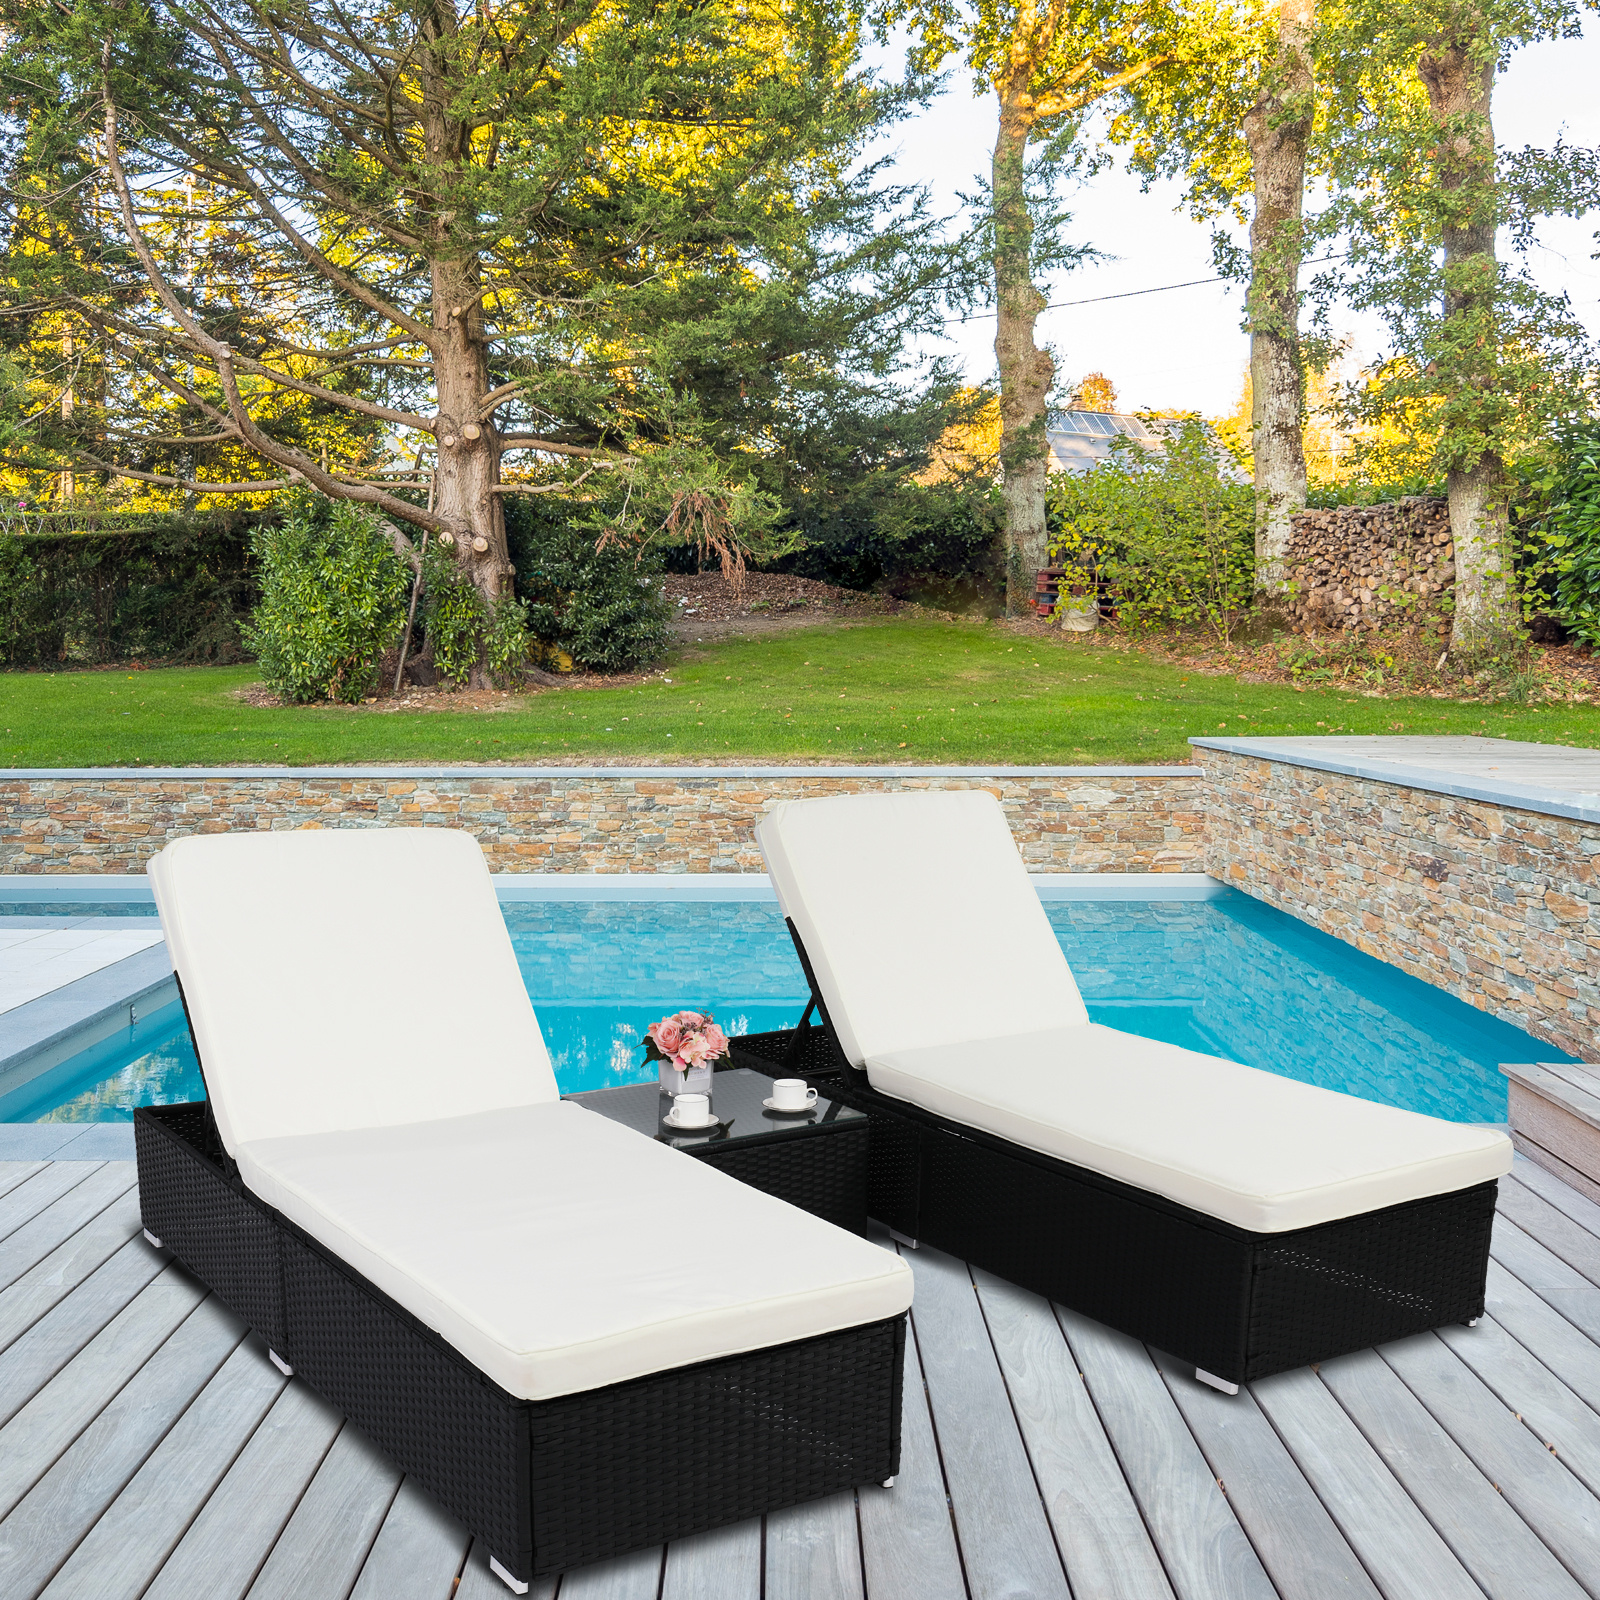 Chaise Lounge Set of 2, Outdoor Lounge Chairs, Chaise Lounge Chairs, Patio Reclining Chair Furniture for Poolside, Deck, Backyard, JA2931 - image 3 of 12